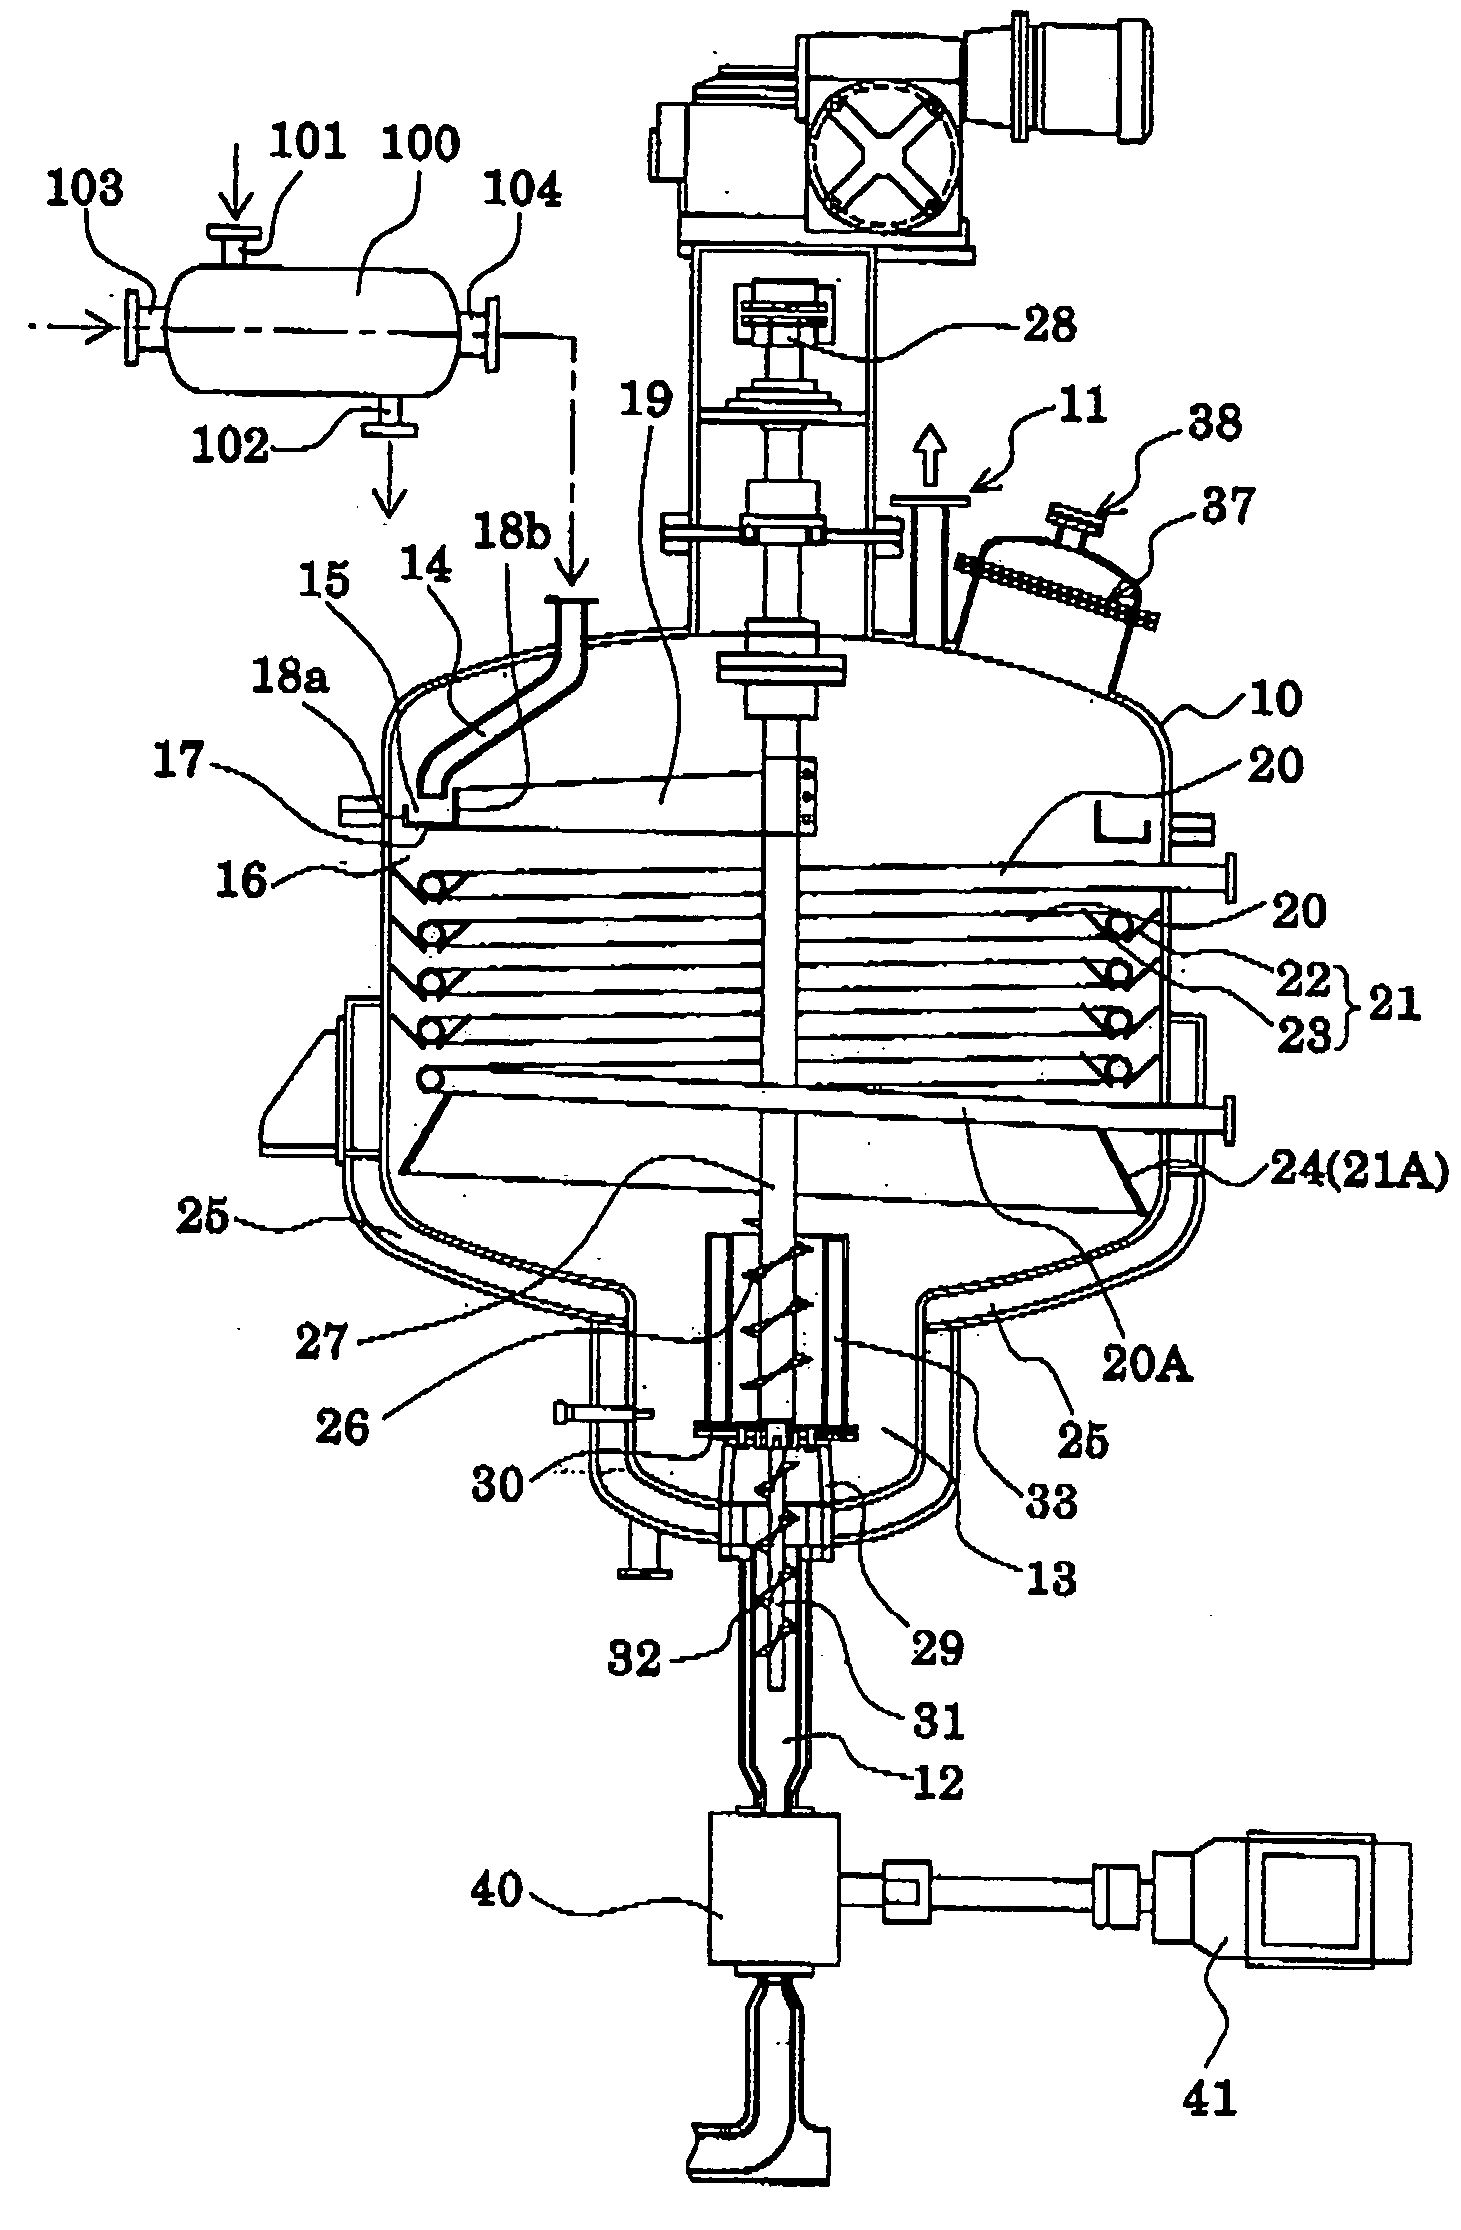 Apparatus for the separation and recovery of volume-reduced polystyrene resin gel